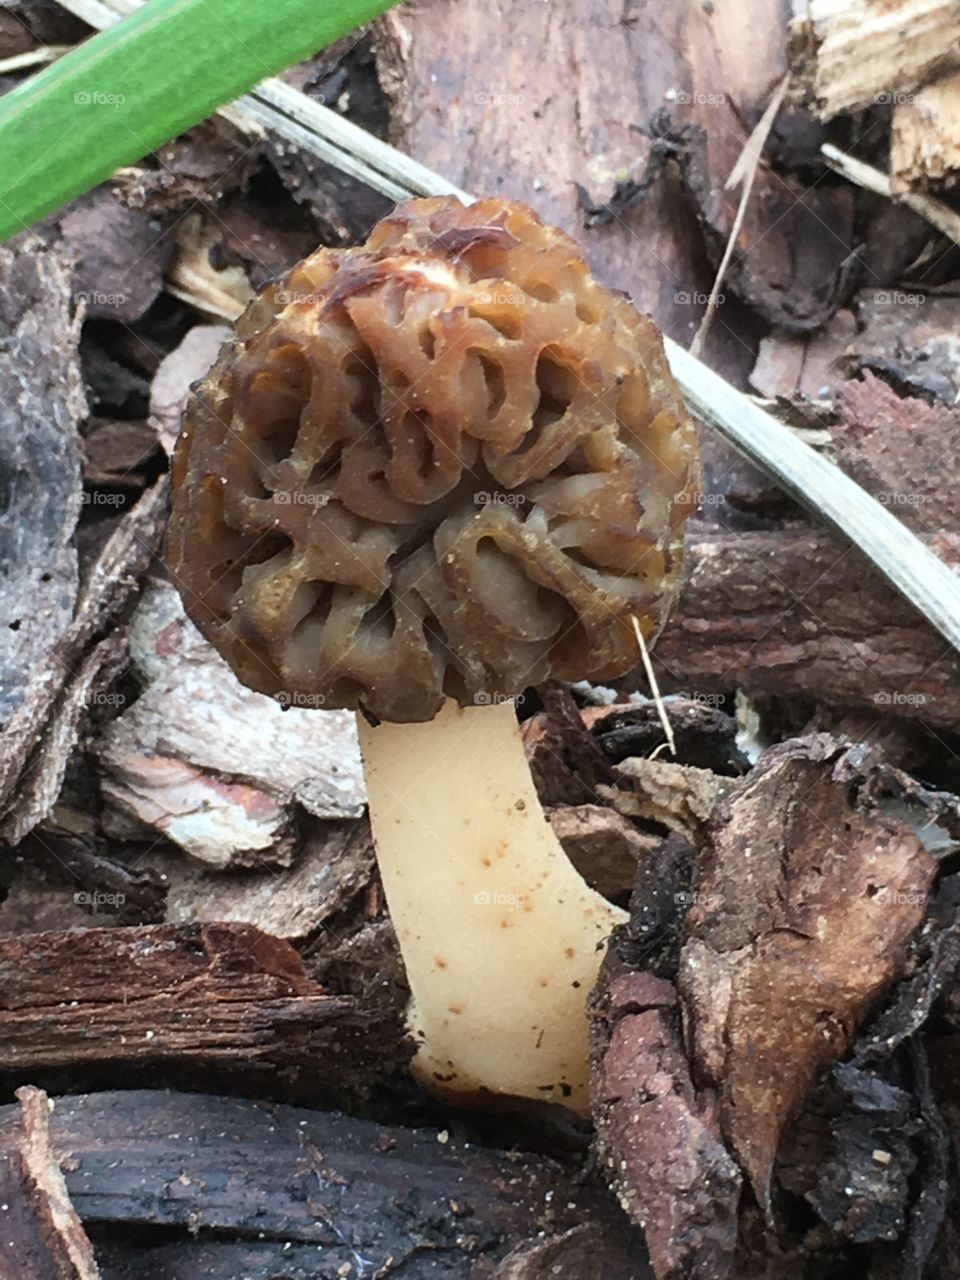 Unusual “brain mushroom” (fake morel also known as Gyromitra esculenta) surrounded by wood chip bark in front garden